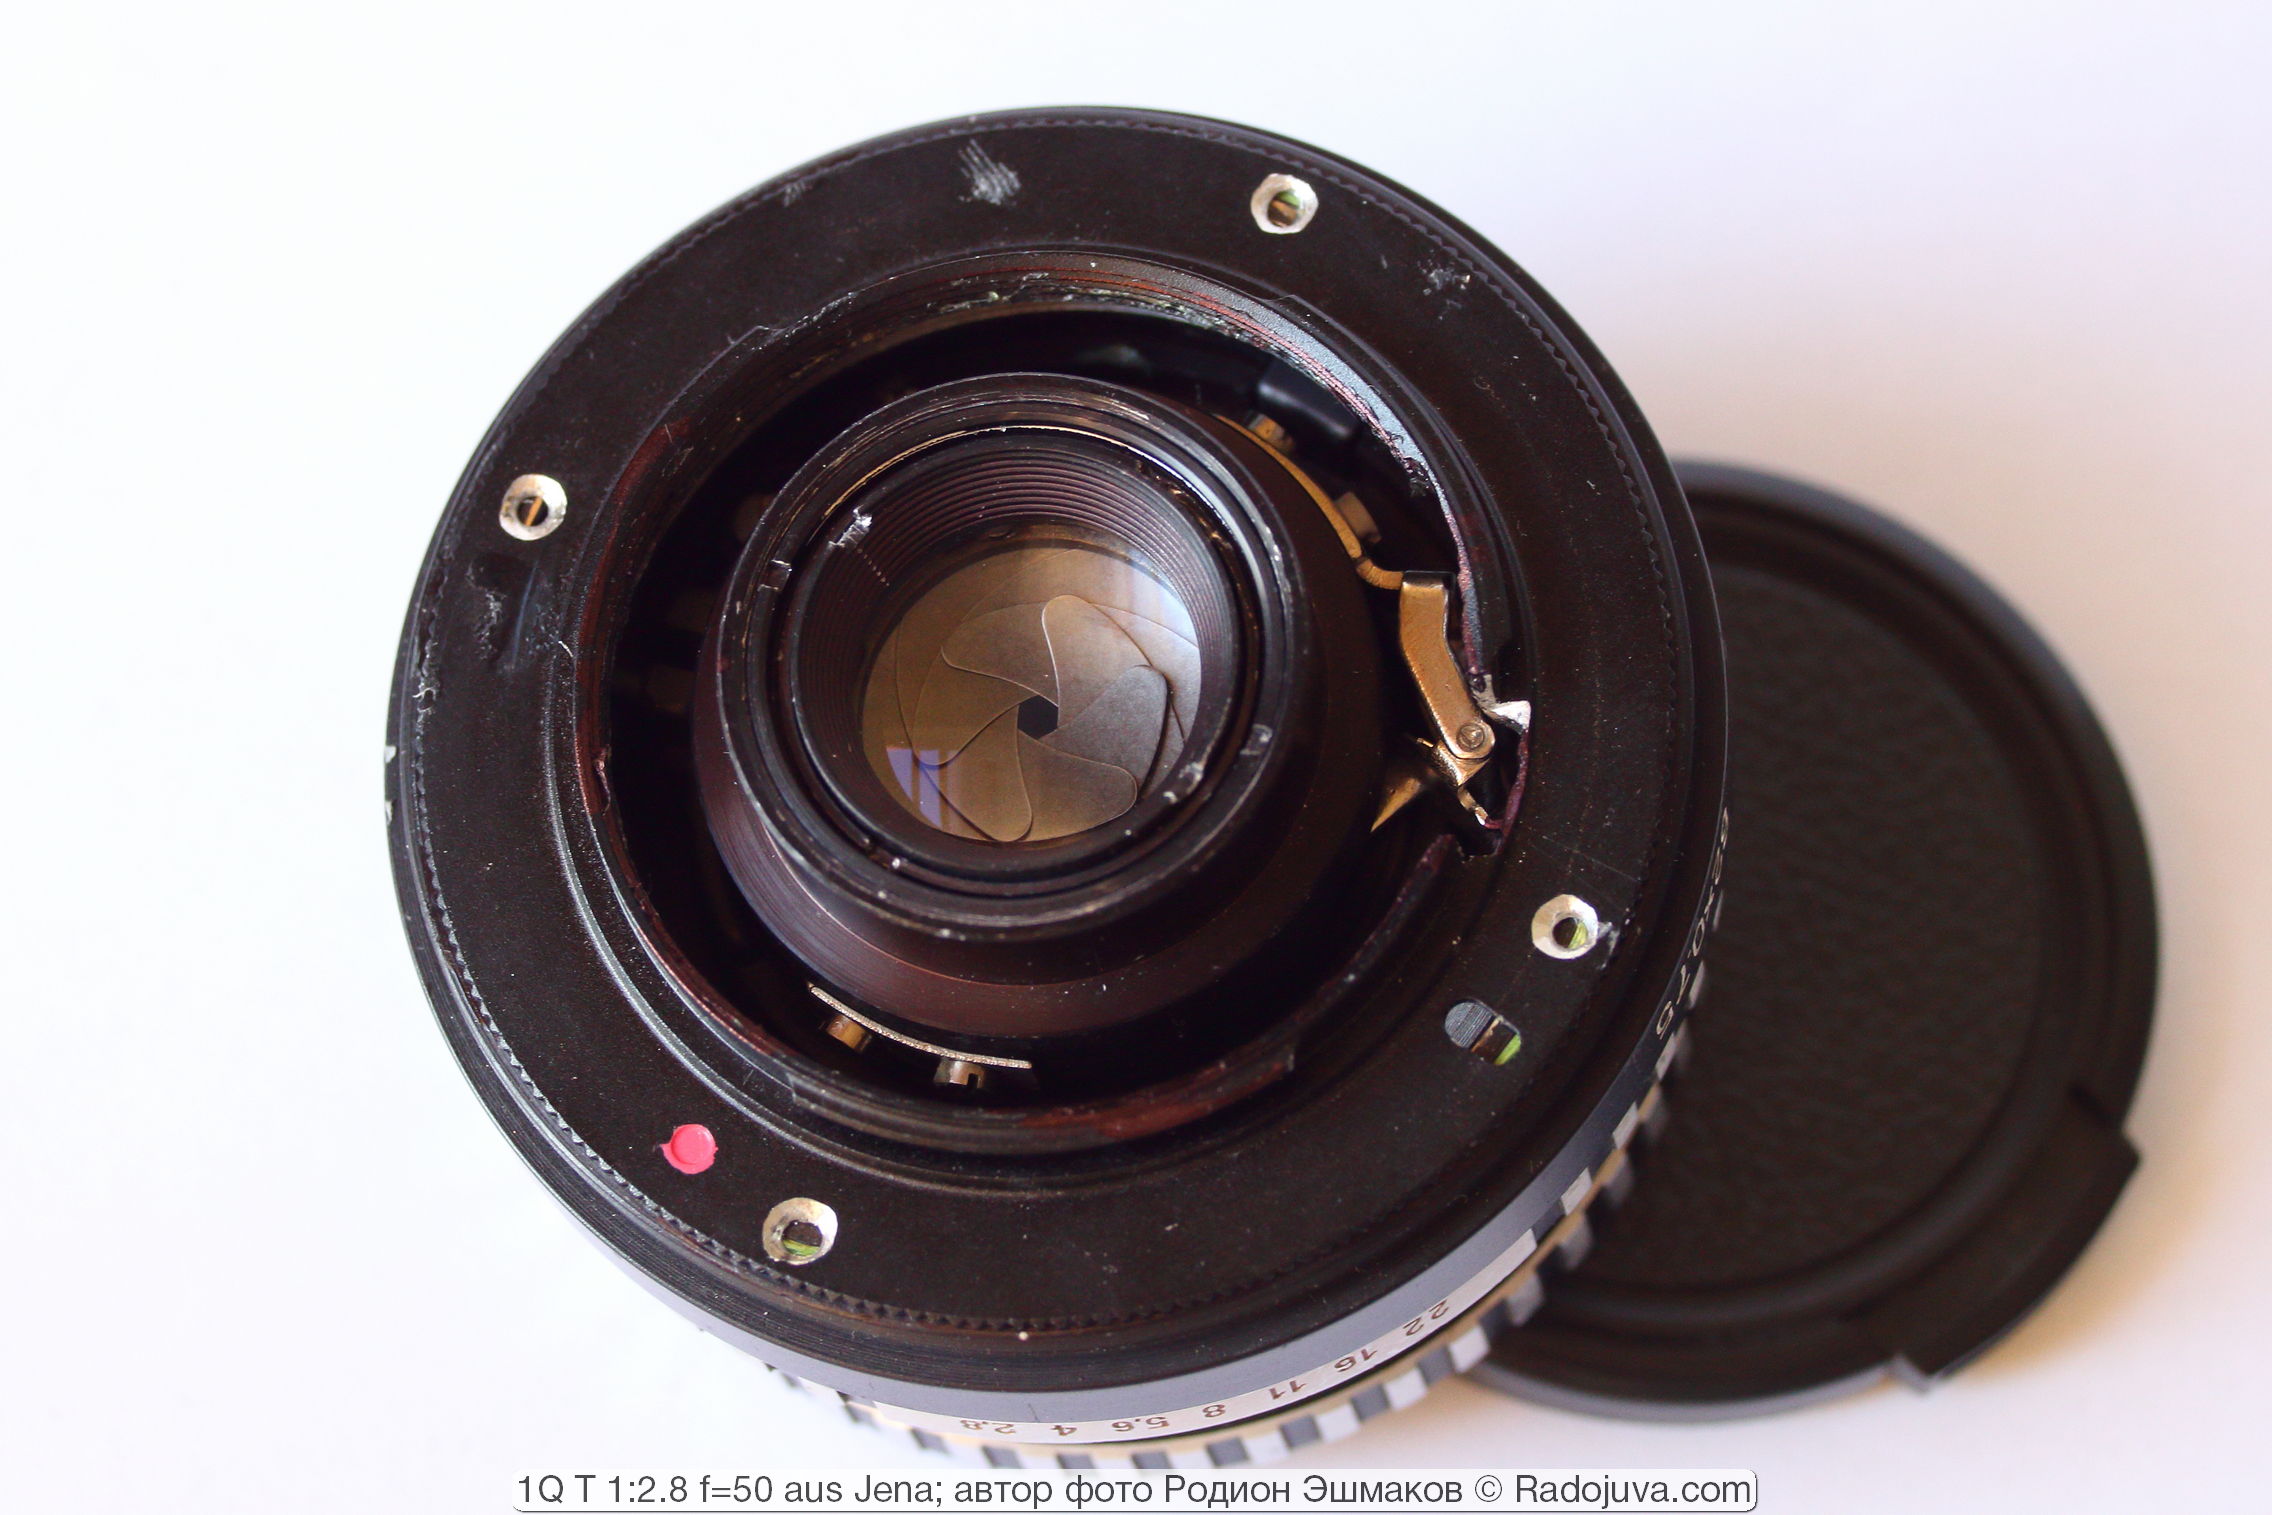 View of the adapted lens from the side of the shank.